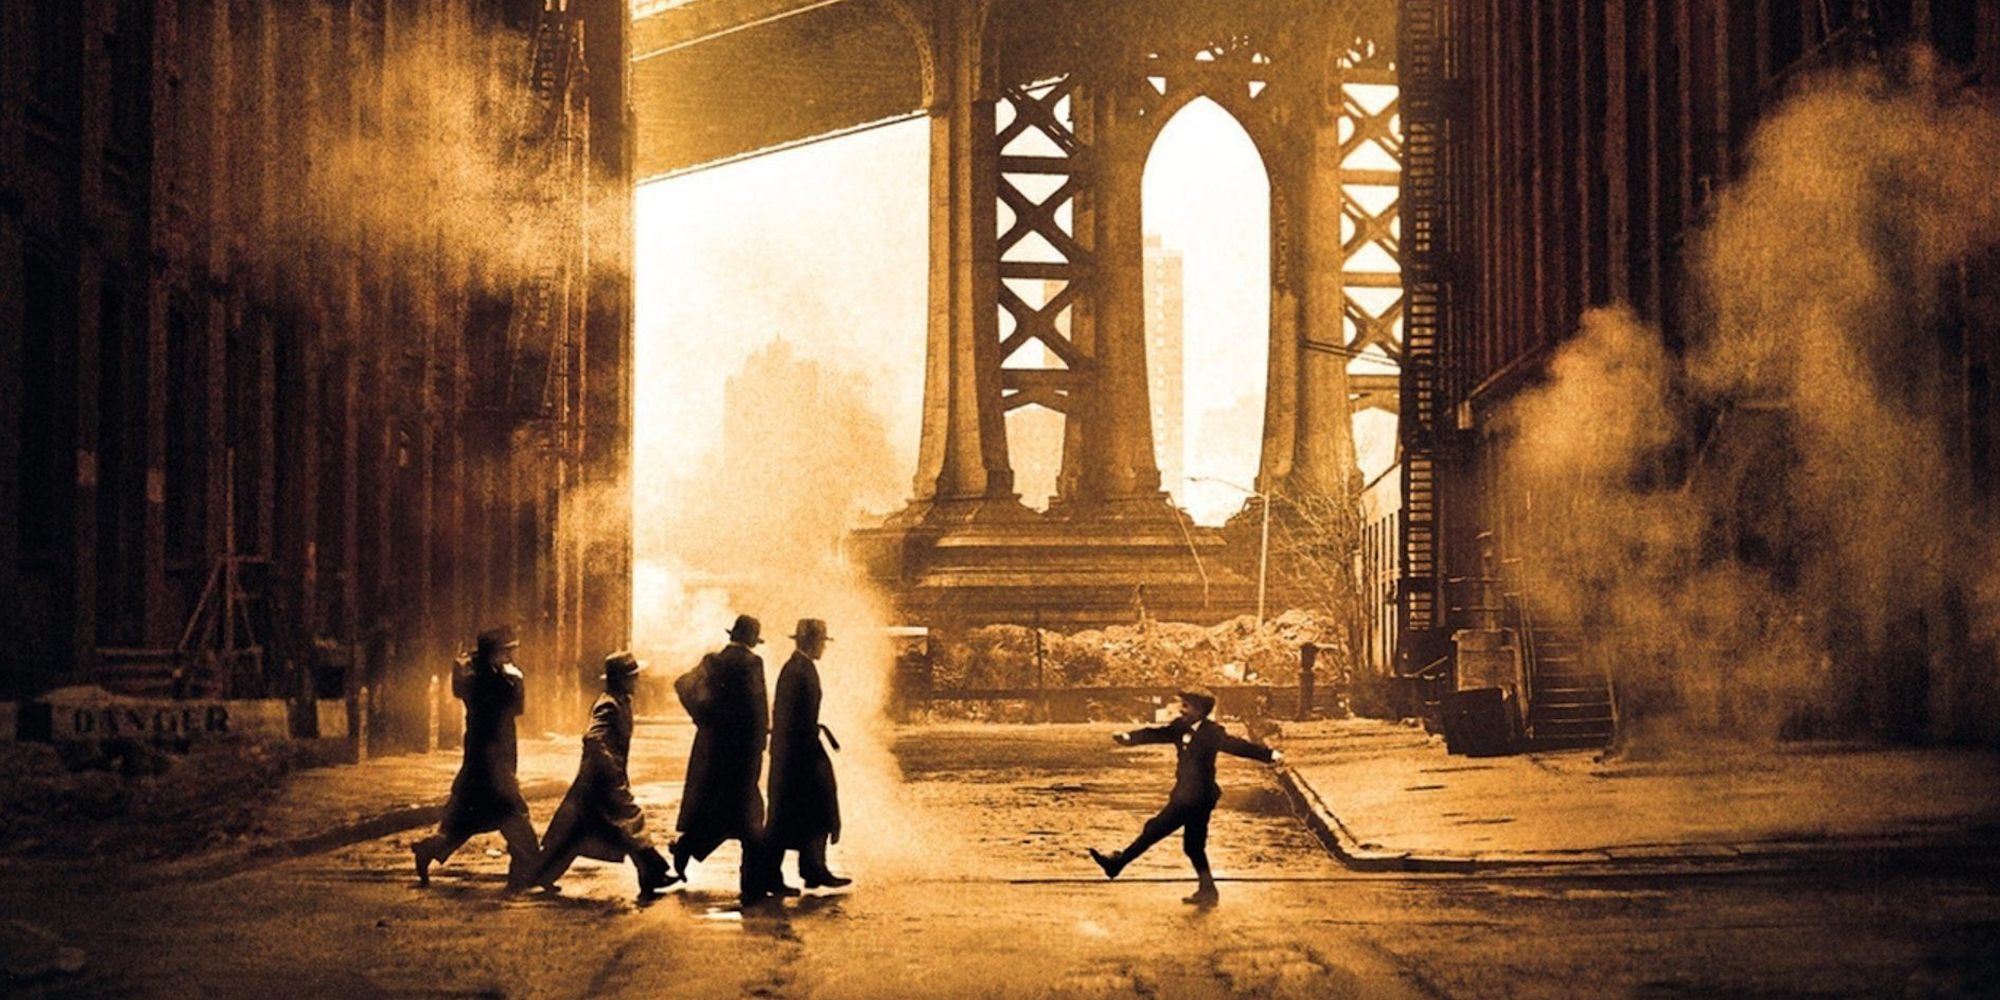 Promotional Image for 'Once Upon a Time in America'